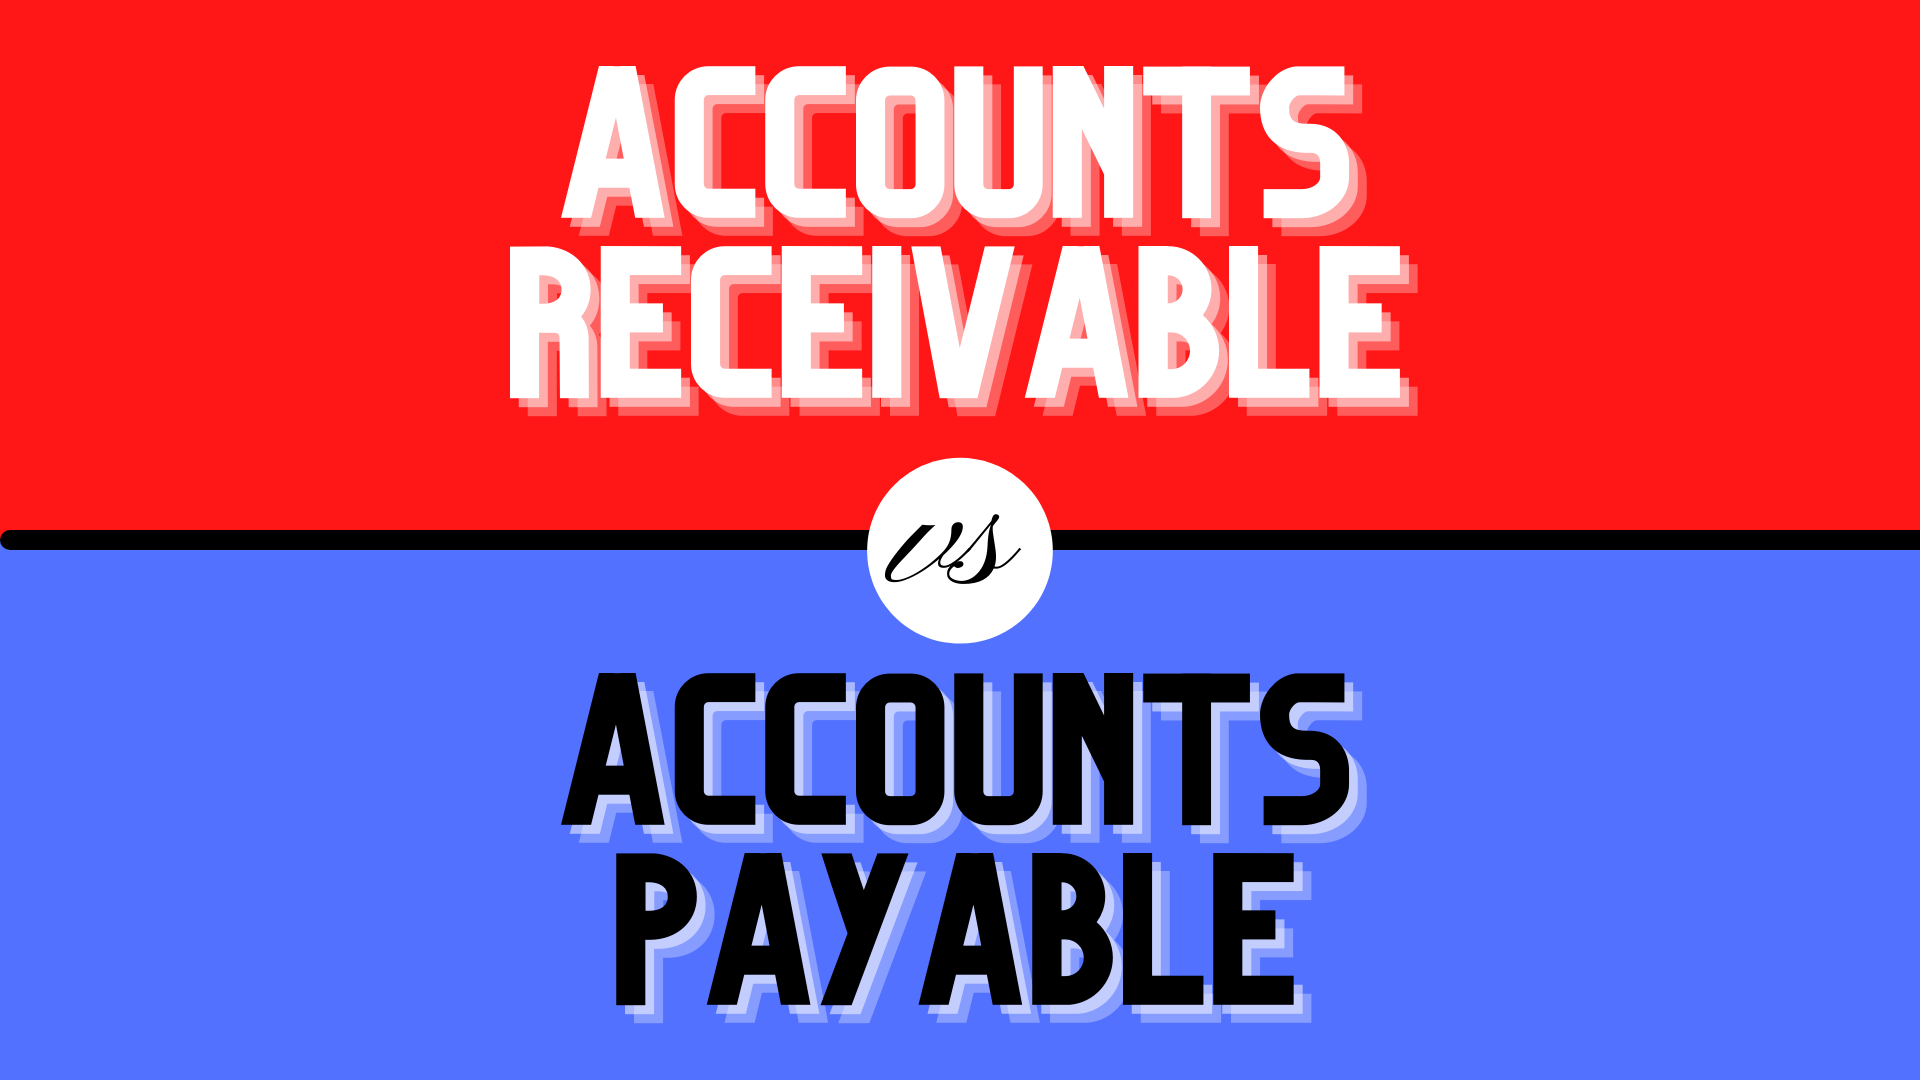 Accounts receivable vs accounts payable: what’s the difference?